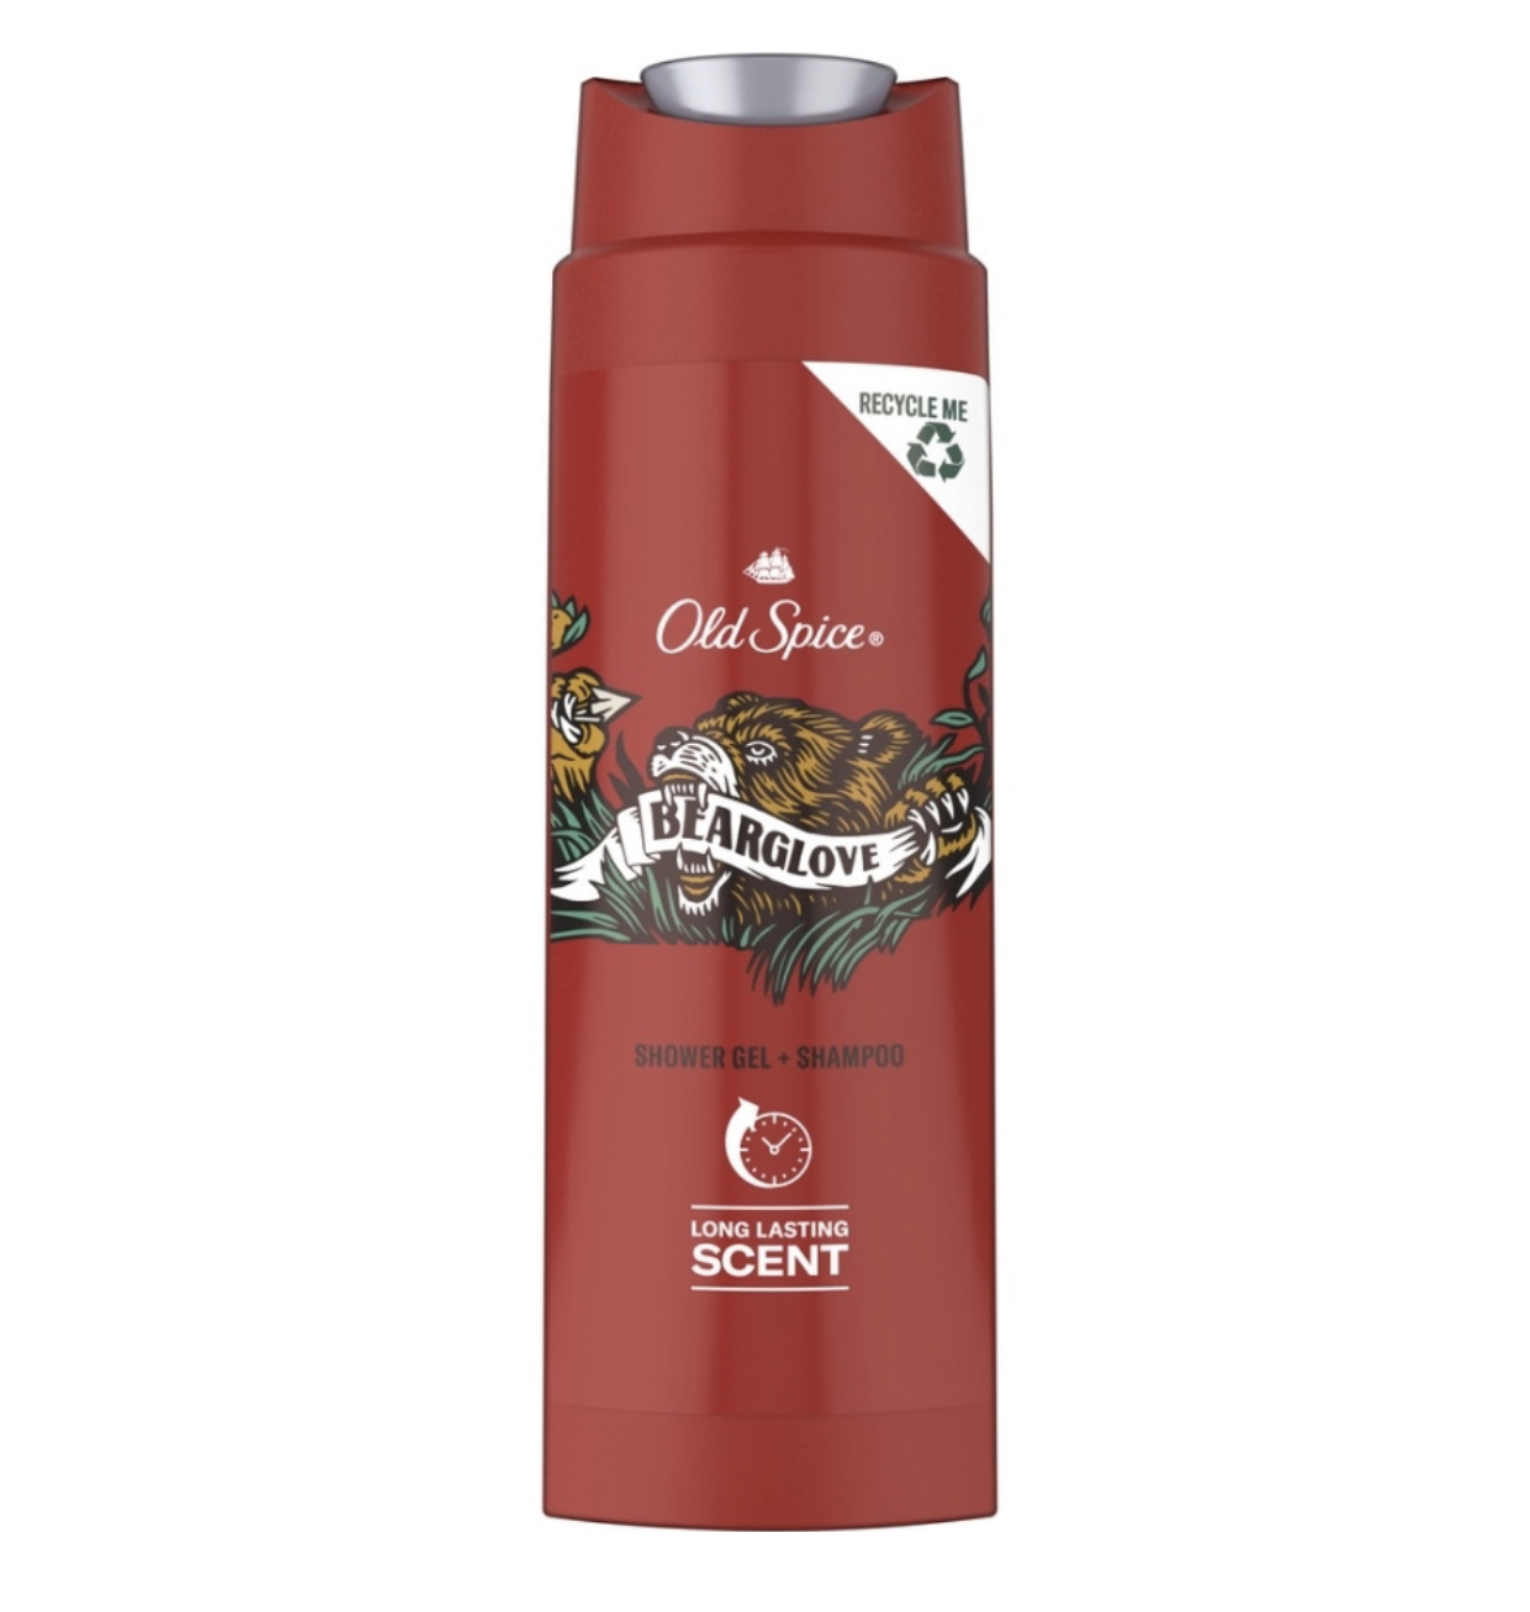    / Old Spice Bearglove -      21 250 